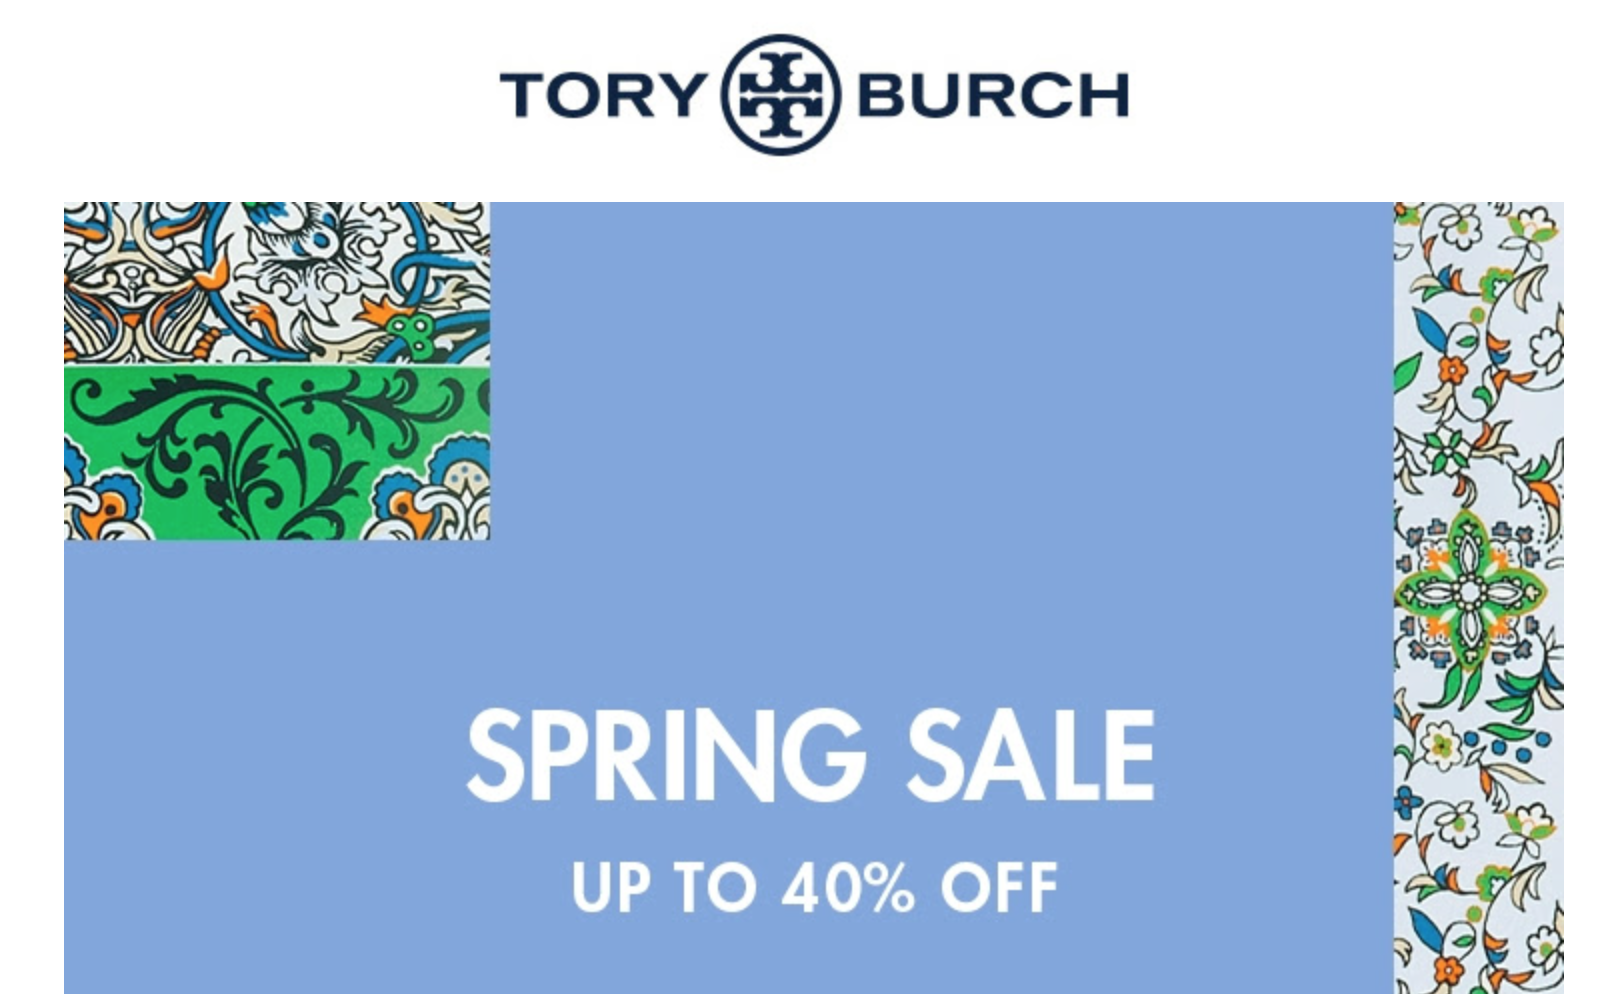 New Tory Burch Markdowns! Save Up To 40% Off + Free Shipping - The Double  Take Girls